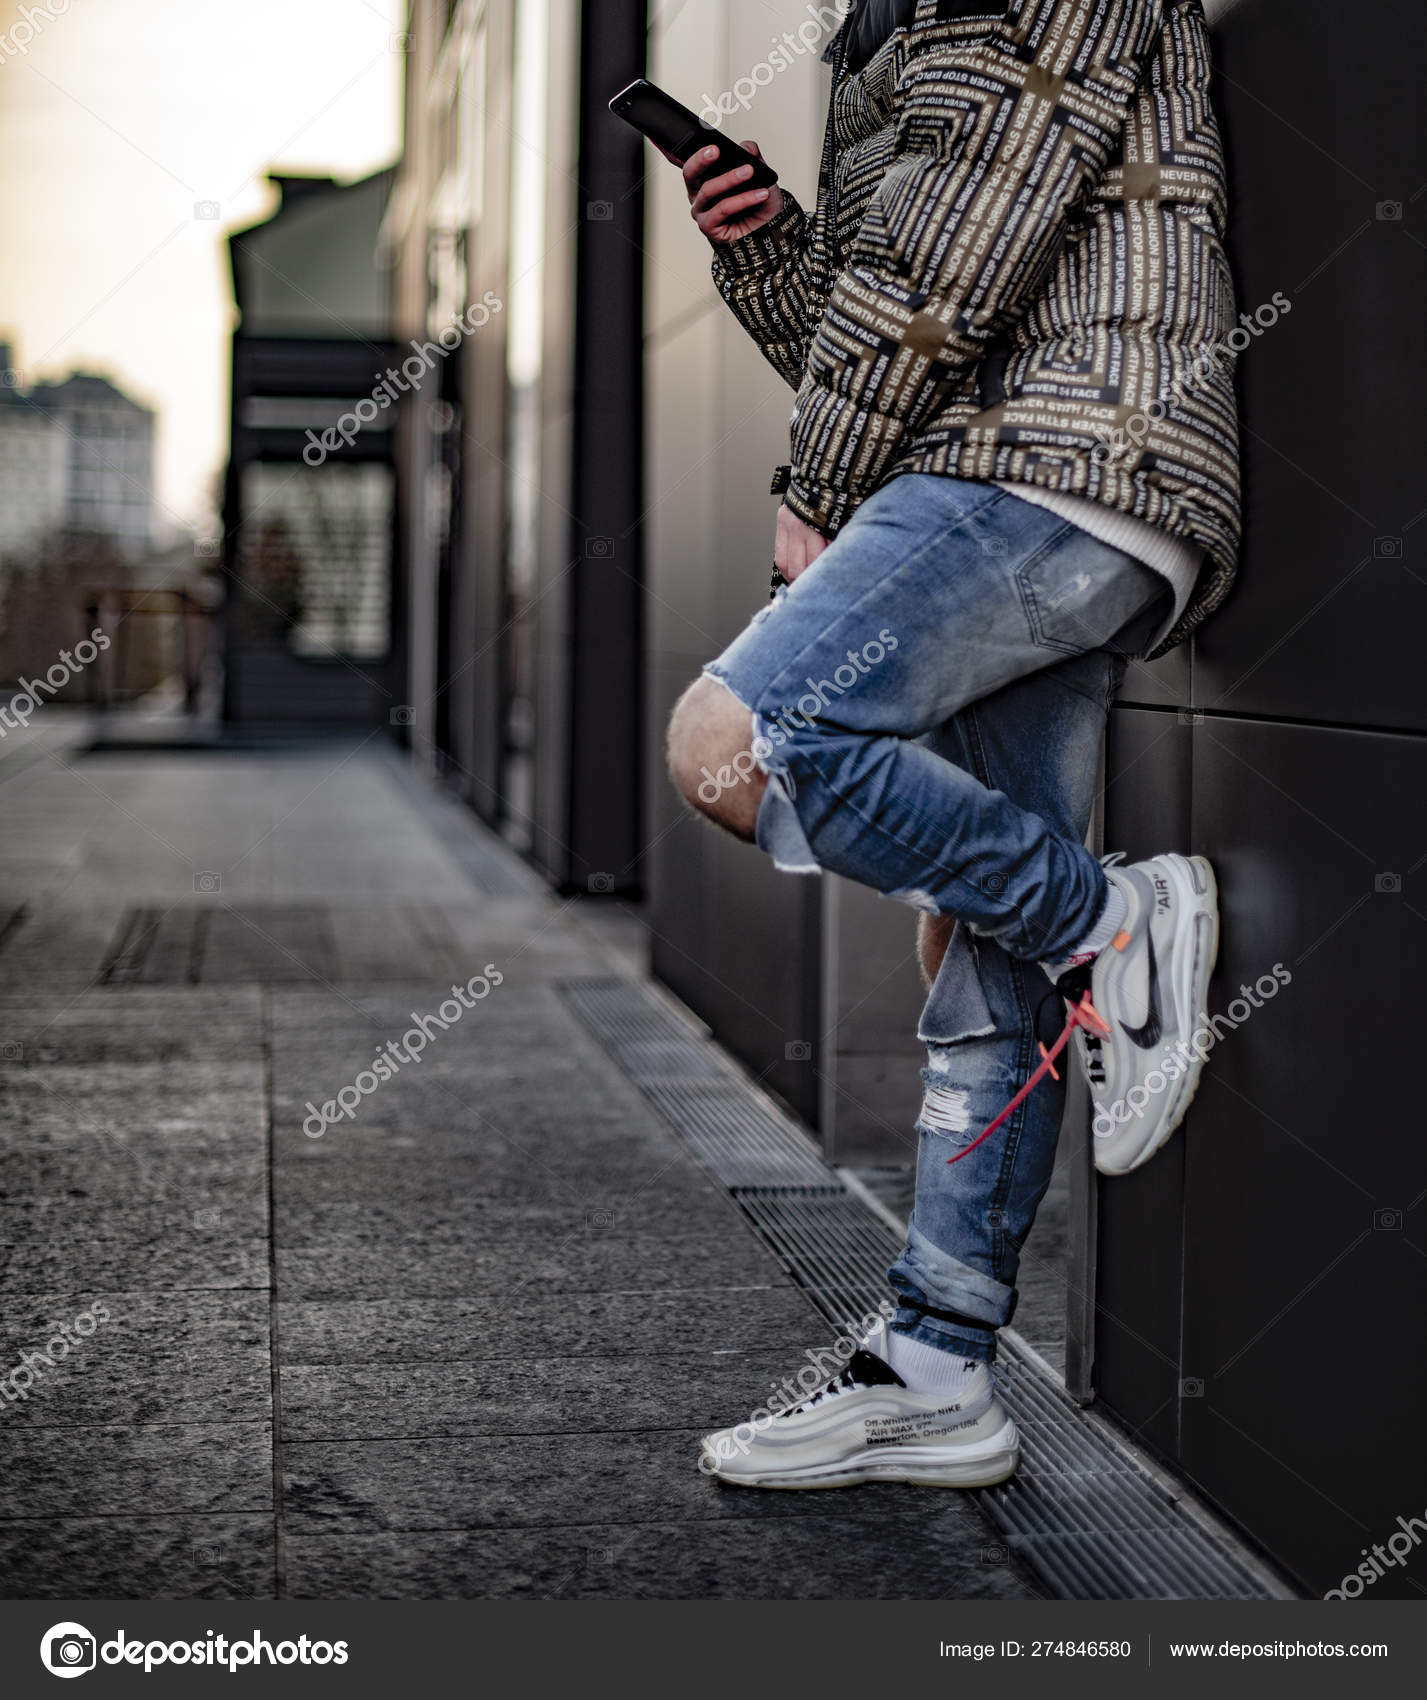 nike air 97 outfit